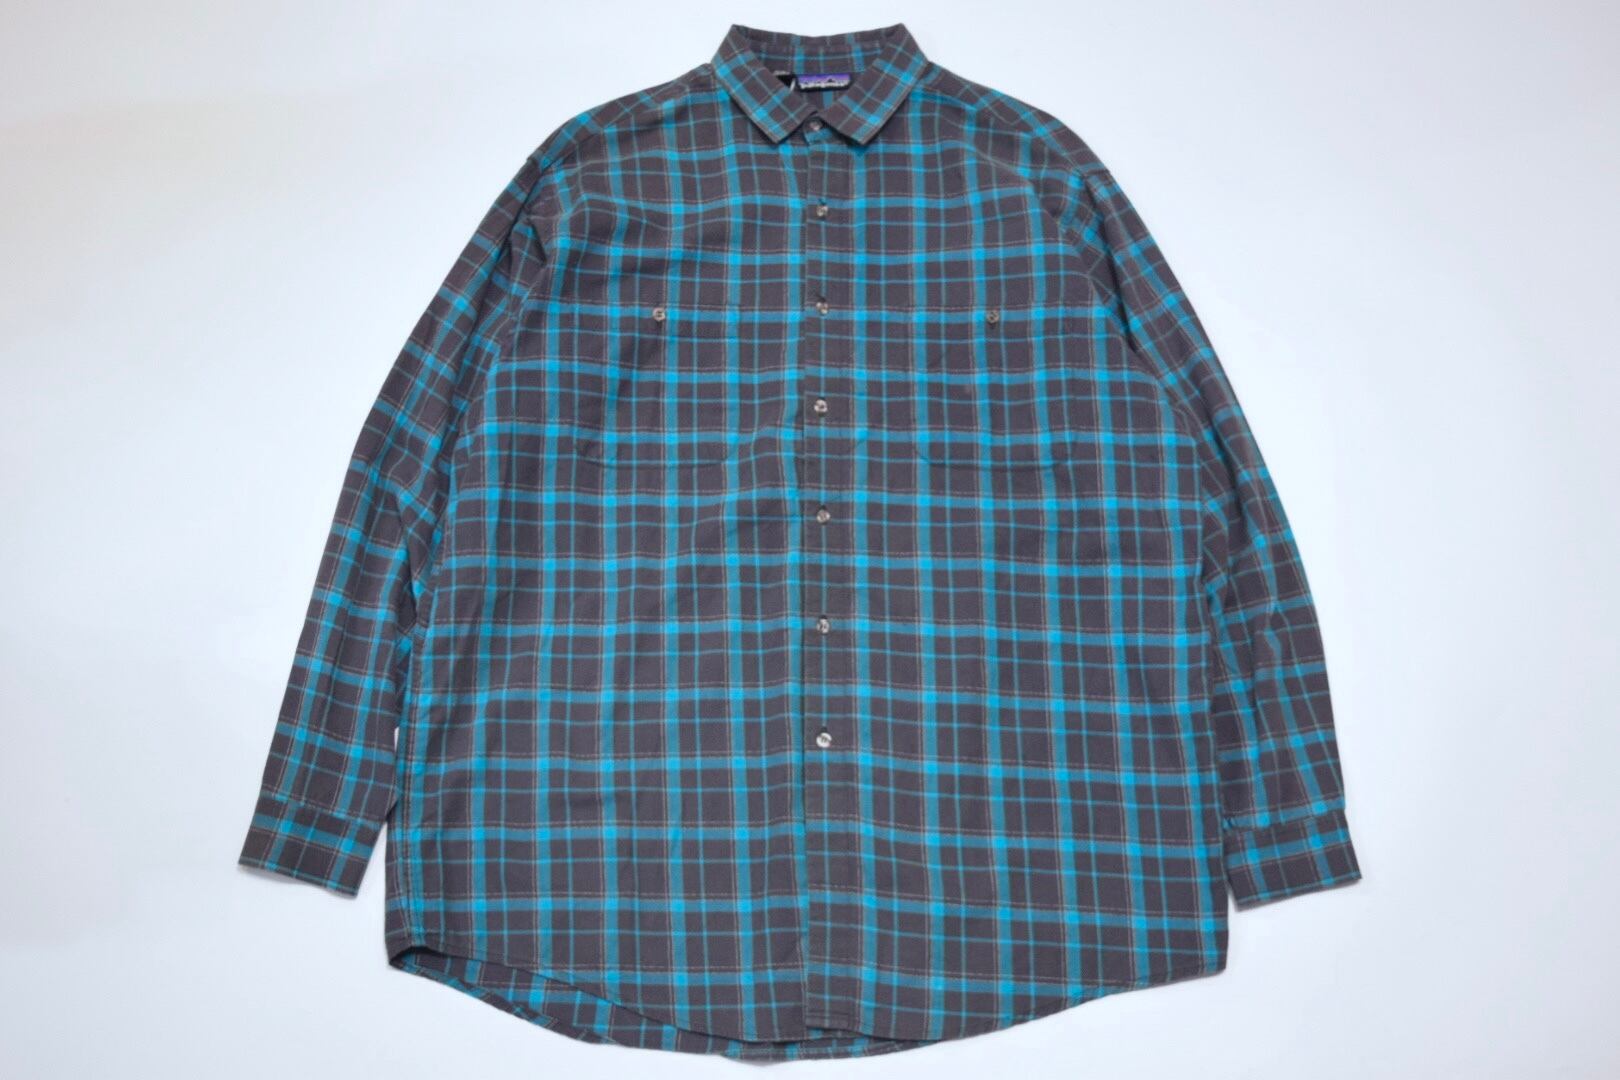 USED 90s patagonia flannel shirt -Large 01415